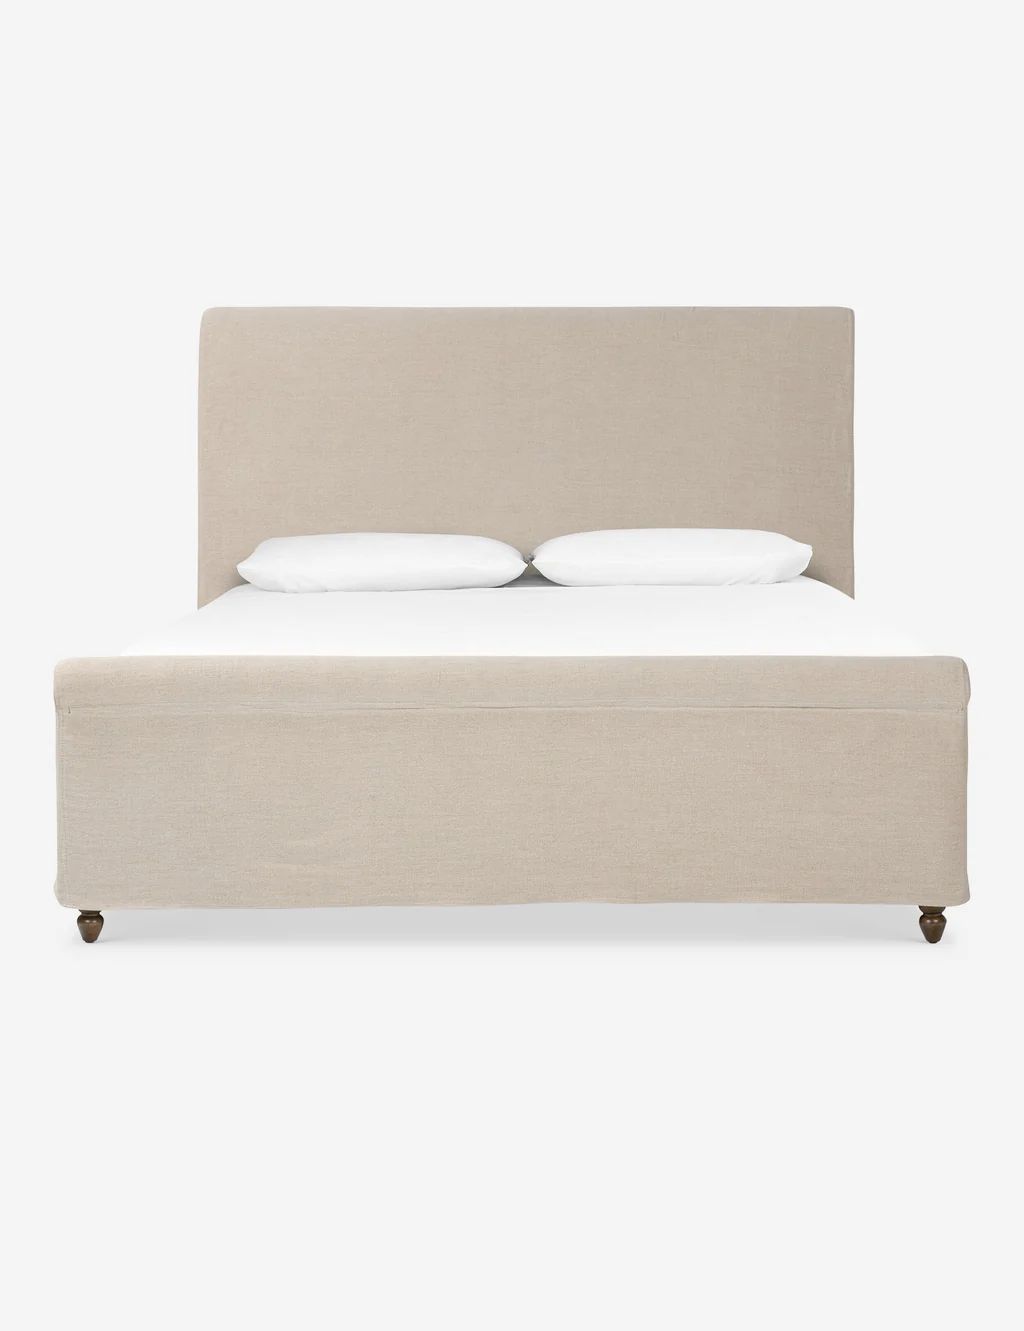 Dalia Slipcover Bed by Amber Lewis x Four Hands | Lulu and Georgia 